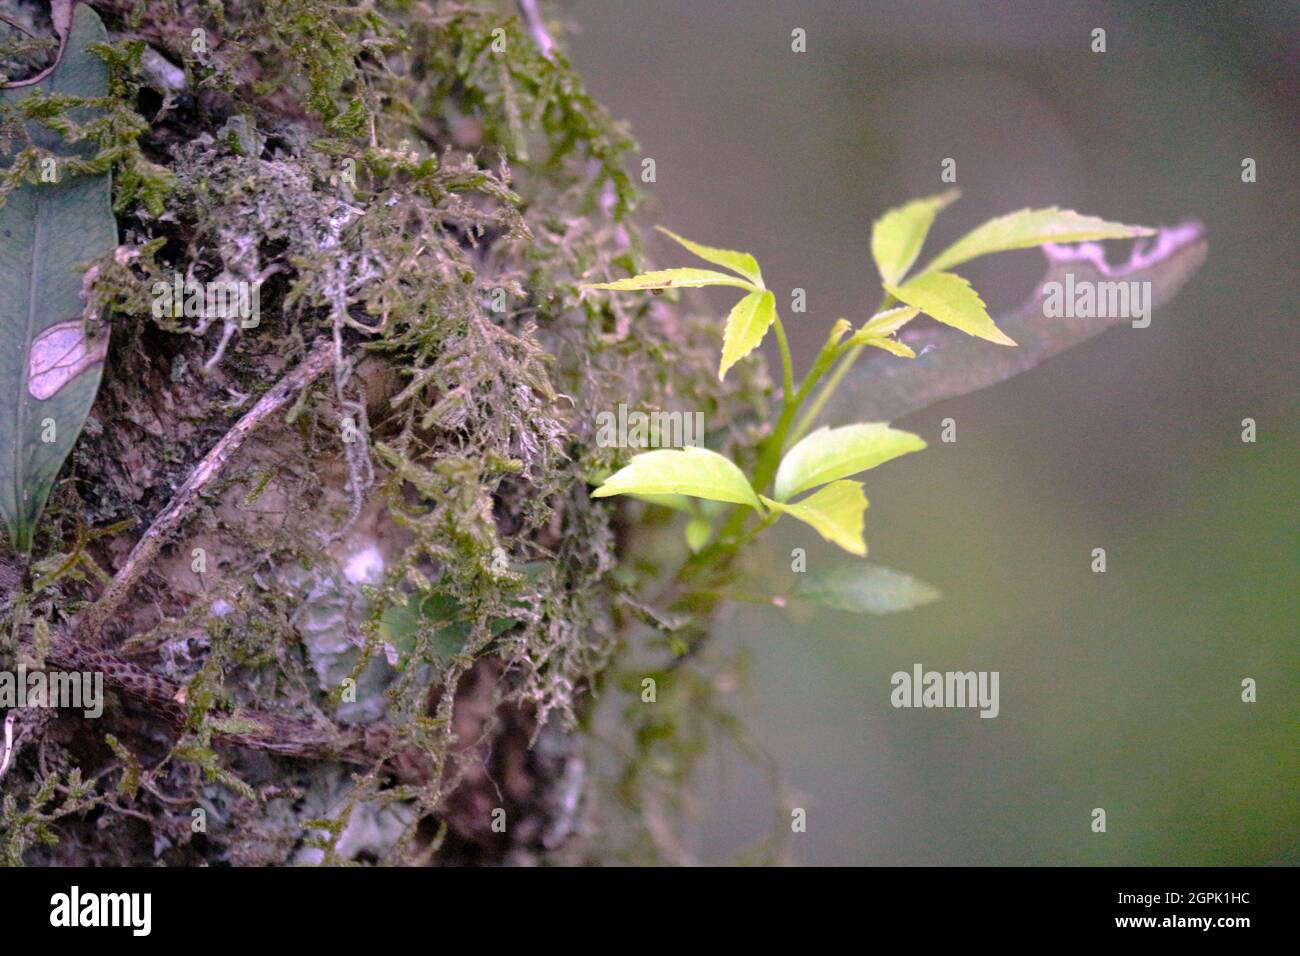 Spring has arrived and life sprouts. Sprout of trees and other terrestrial epiphytes known as aerial plants. Stock Photo